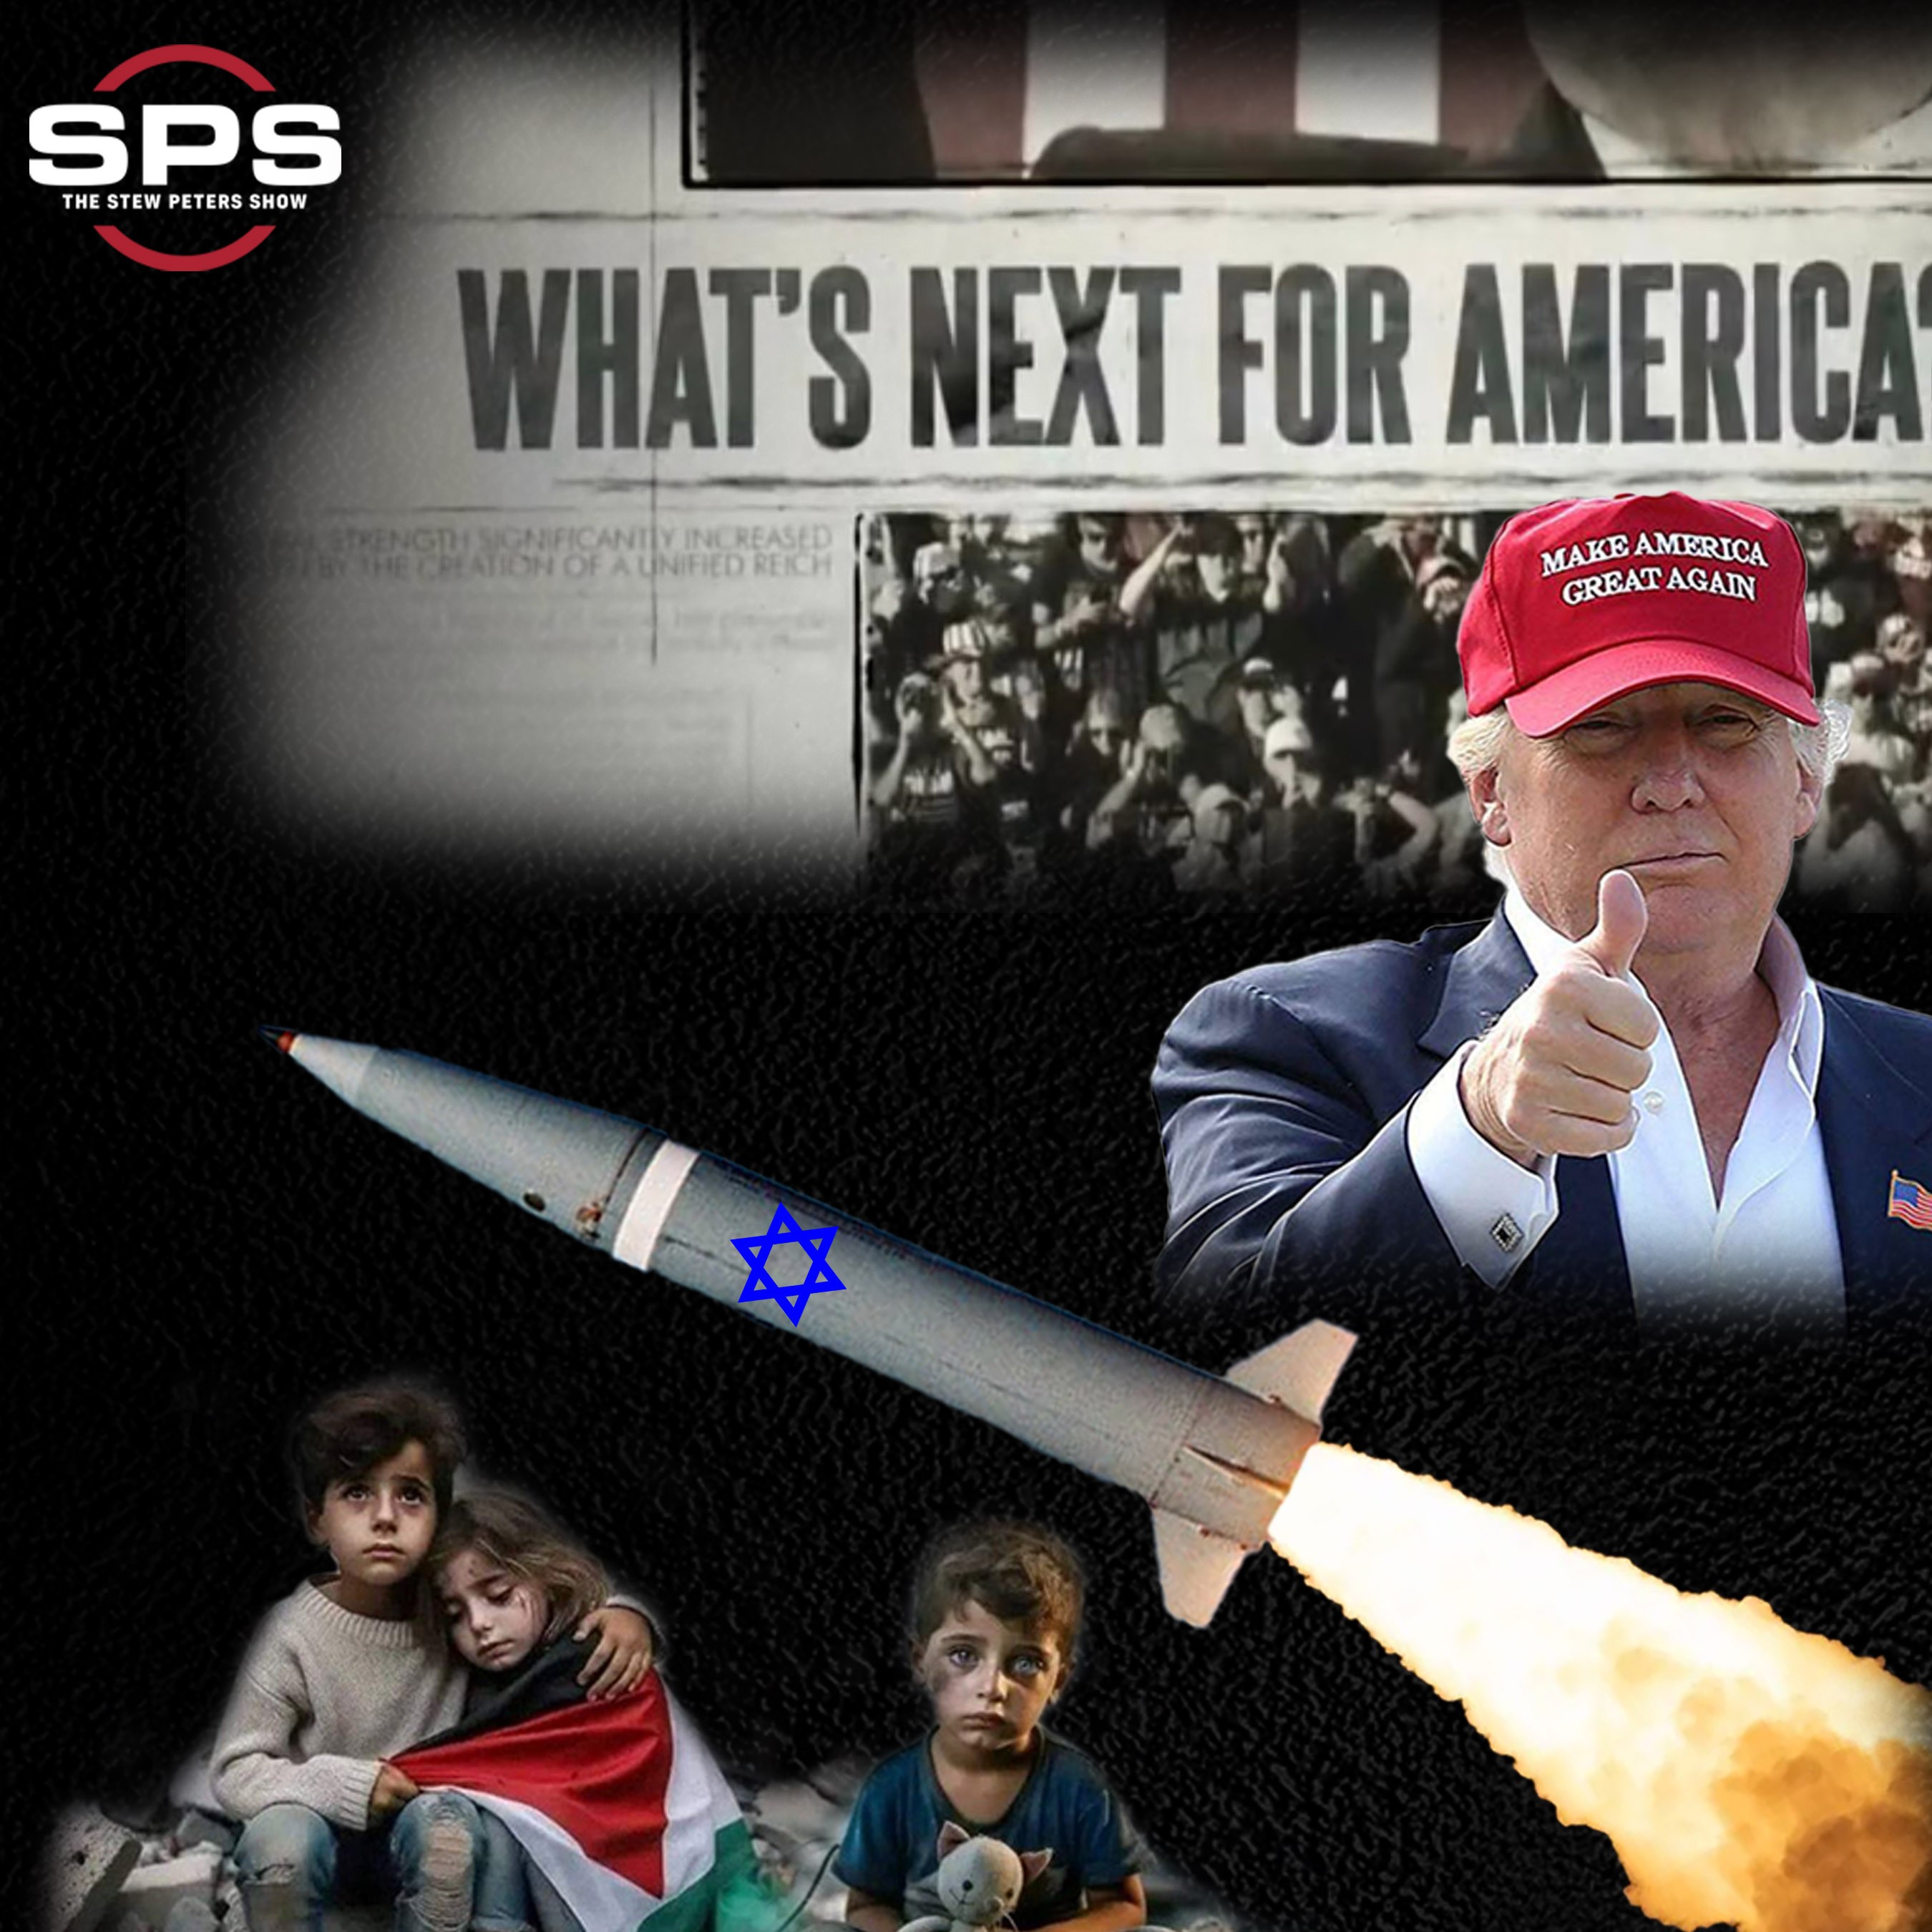 Americans REJECT Israel's GENOCIDE, Media Uses "REICH" Campaign Video & Pushes Trump Nazi HOAX